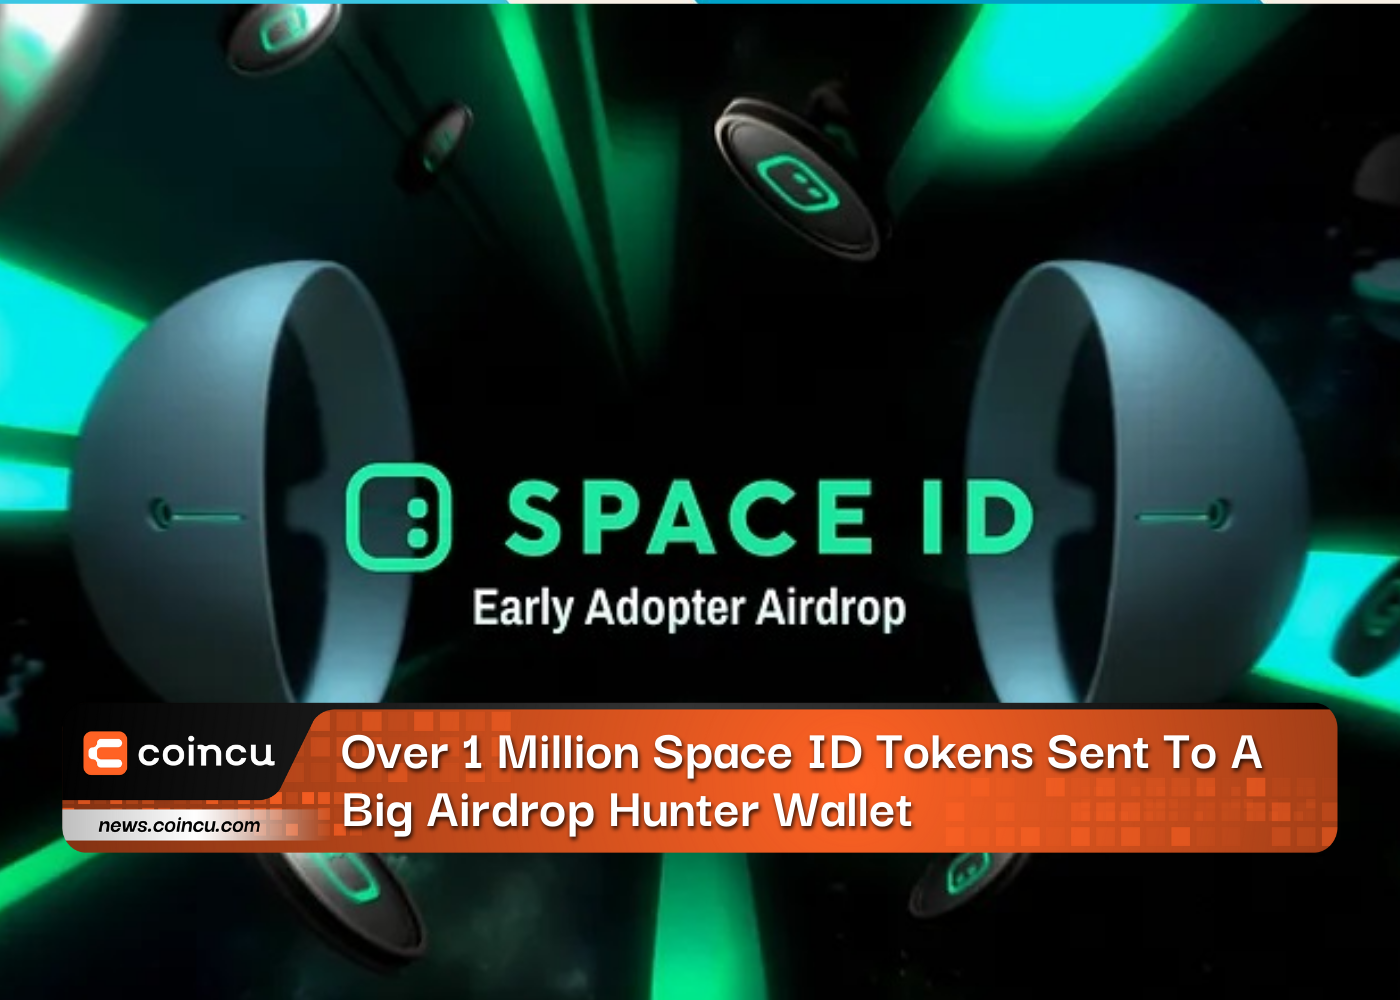 Over 1 Million Space ID Tokens Sent To A Big Airdrop Hunter Wallet